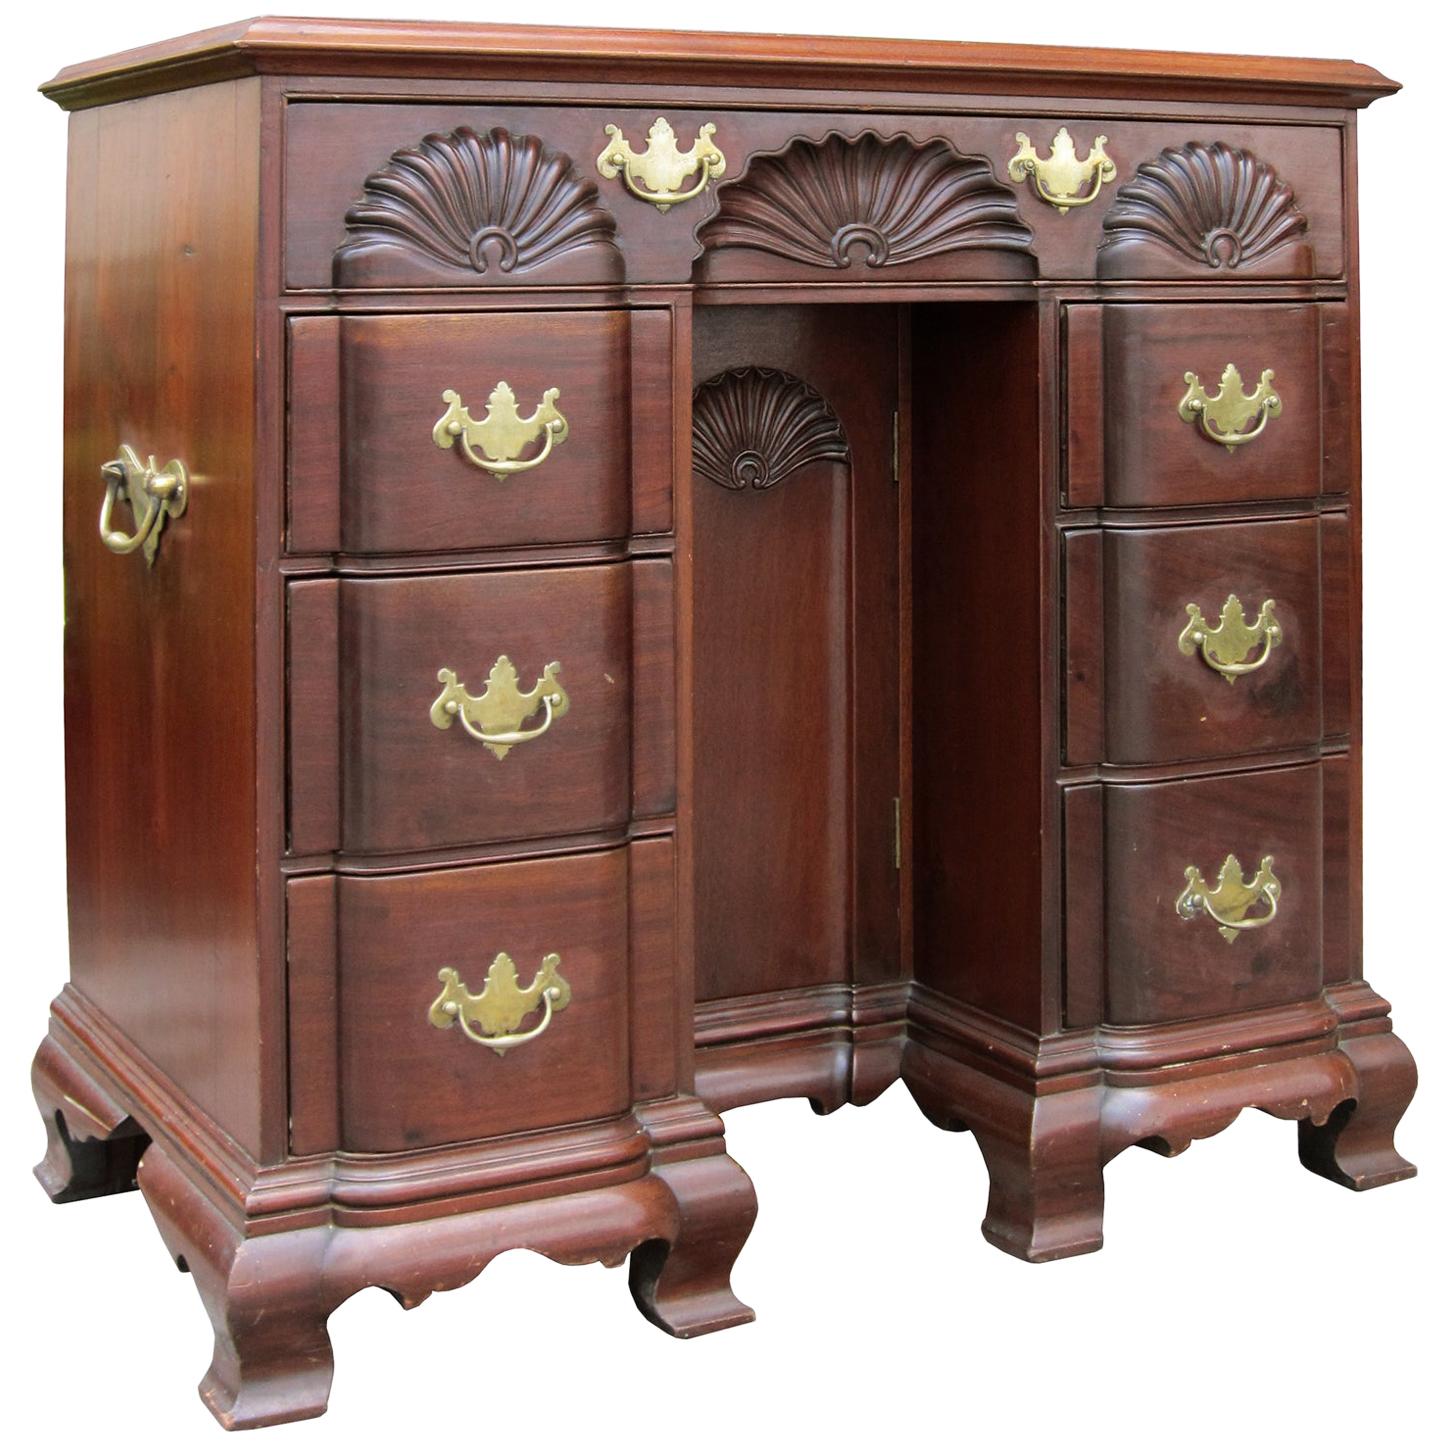 Mahogany Newport, RI Style Desk with Hidden Drawers, circa 1890 For Sale